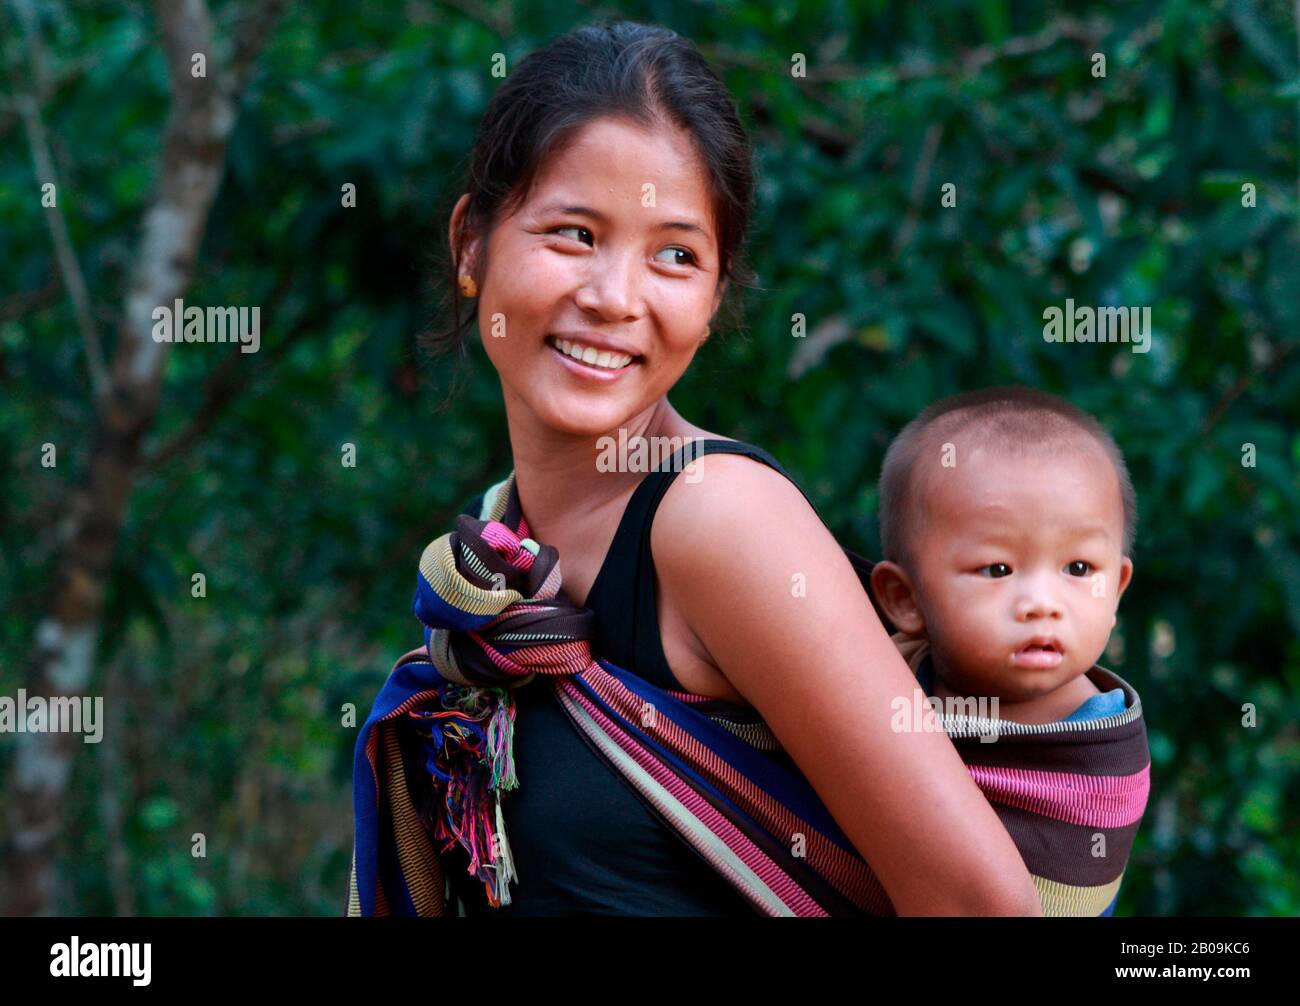 A woman from the Murong community with her child, in Bandarban, Bangladesh. September 26, 2009. Stock Photo